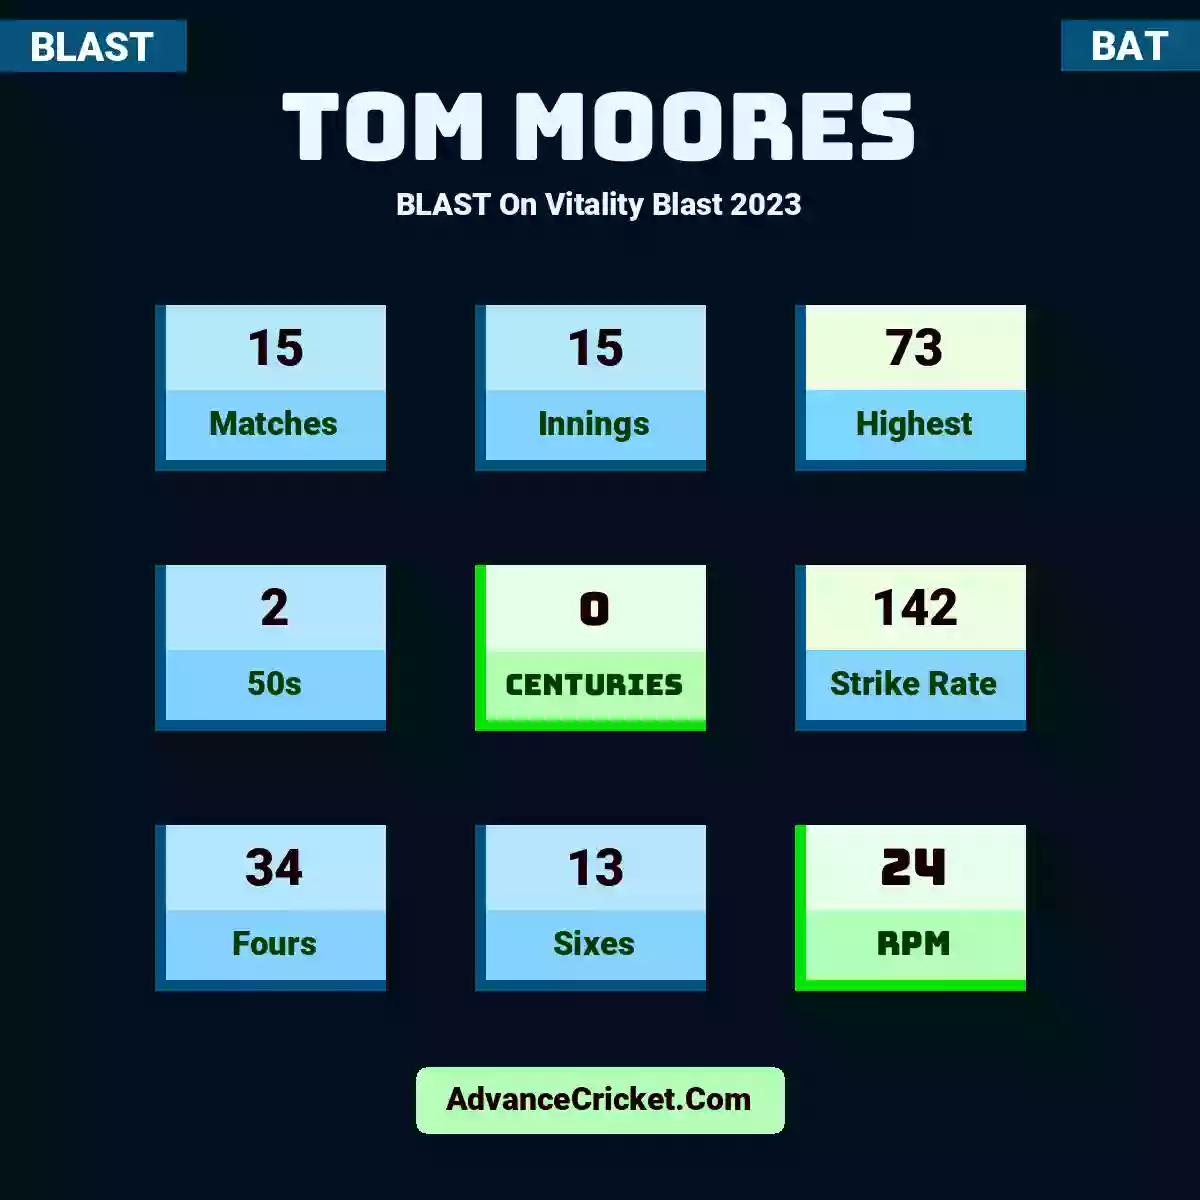 Tom Moores BLAST  On Vitality Blast 2023, Tom Moores played 15 matches, scored 73 runs as highest, 2 half-centuries, and 0 centuries, with a strike rate of 142. T.Moores hit 34 fours and 13 sixes, with an RPM of 24.